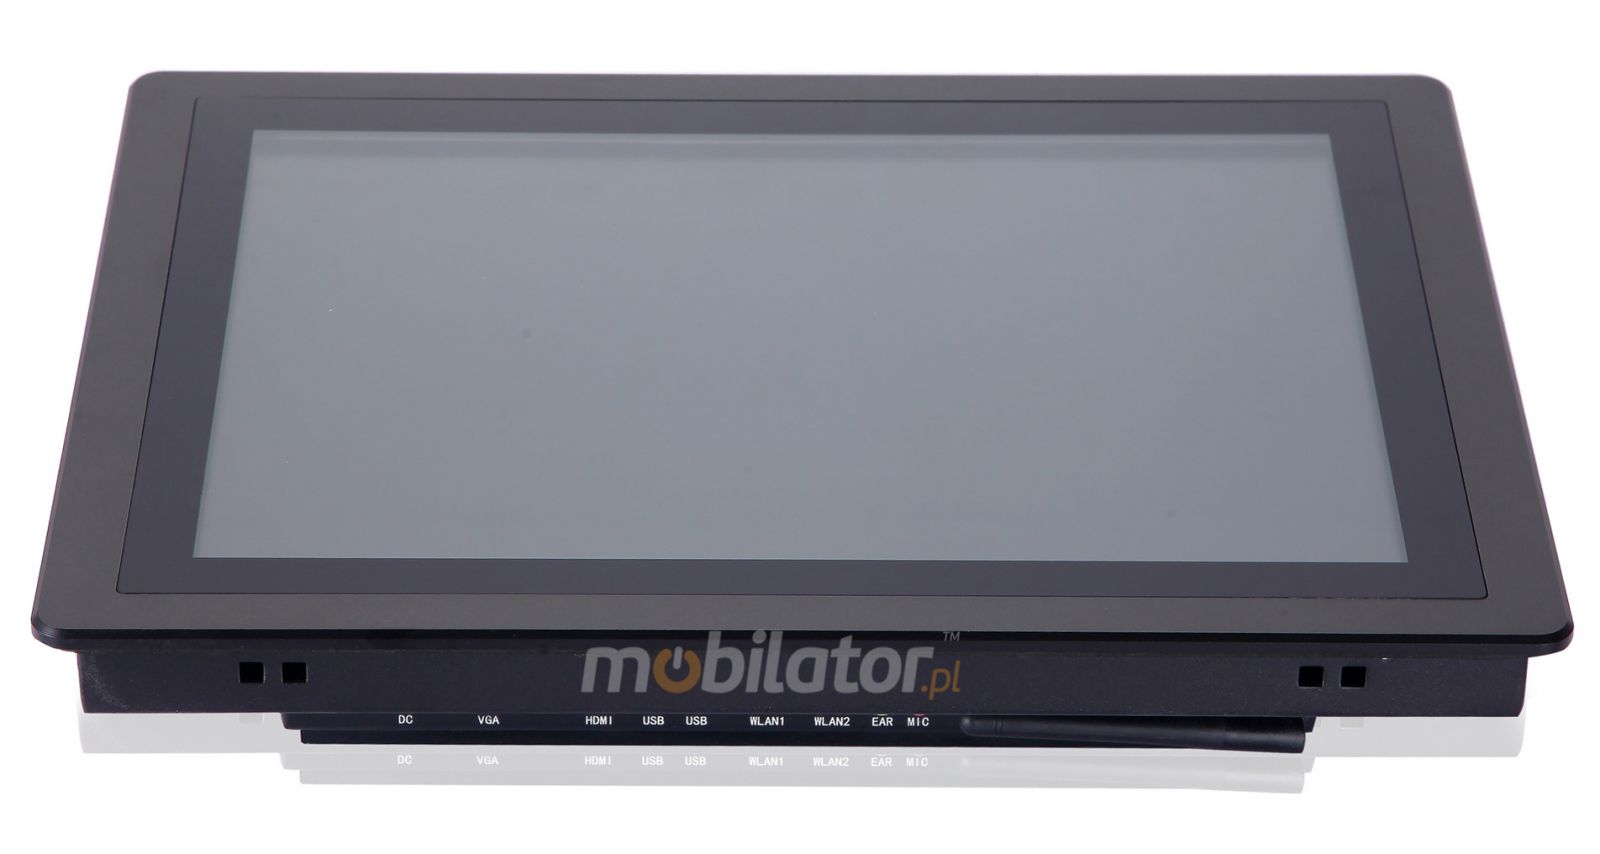 Mobilator Flat Design PCAP CTPC150RD3  Fanless Touch PC, LED panel, 10 points touch screen, built-in WIFI, 12V DC input